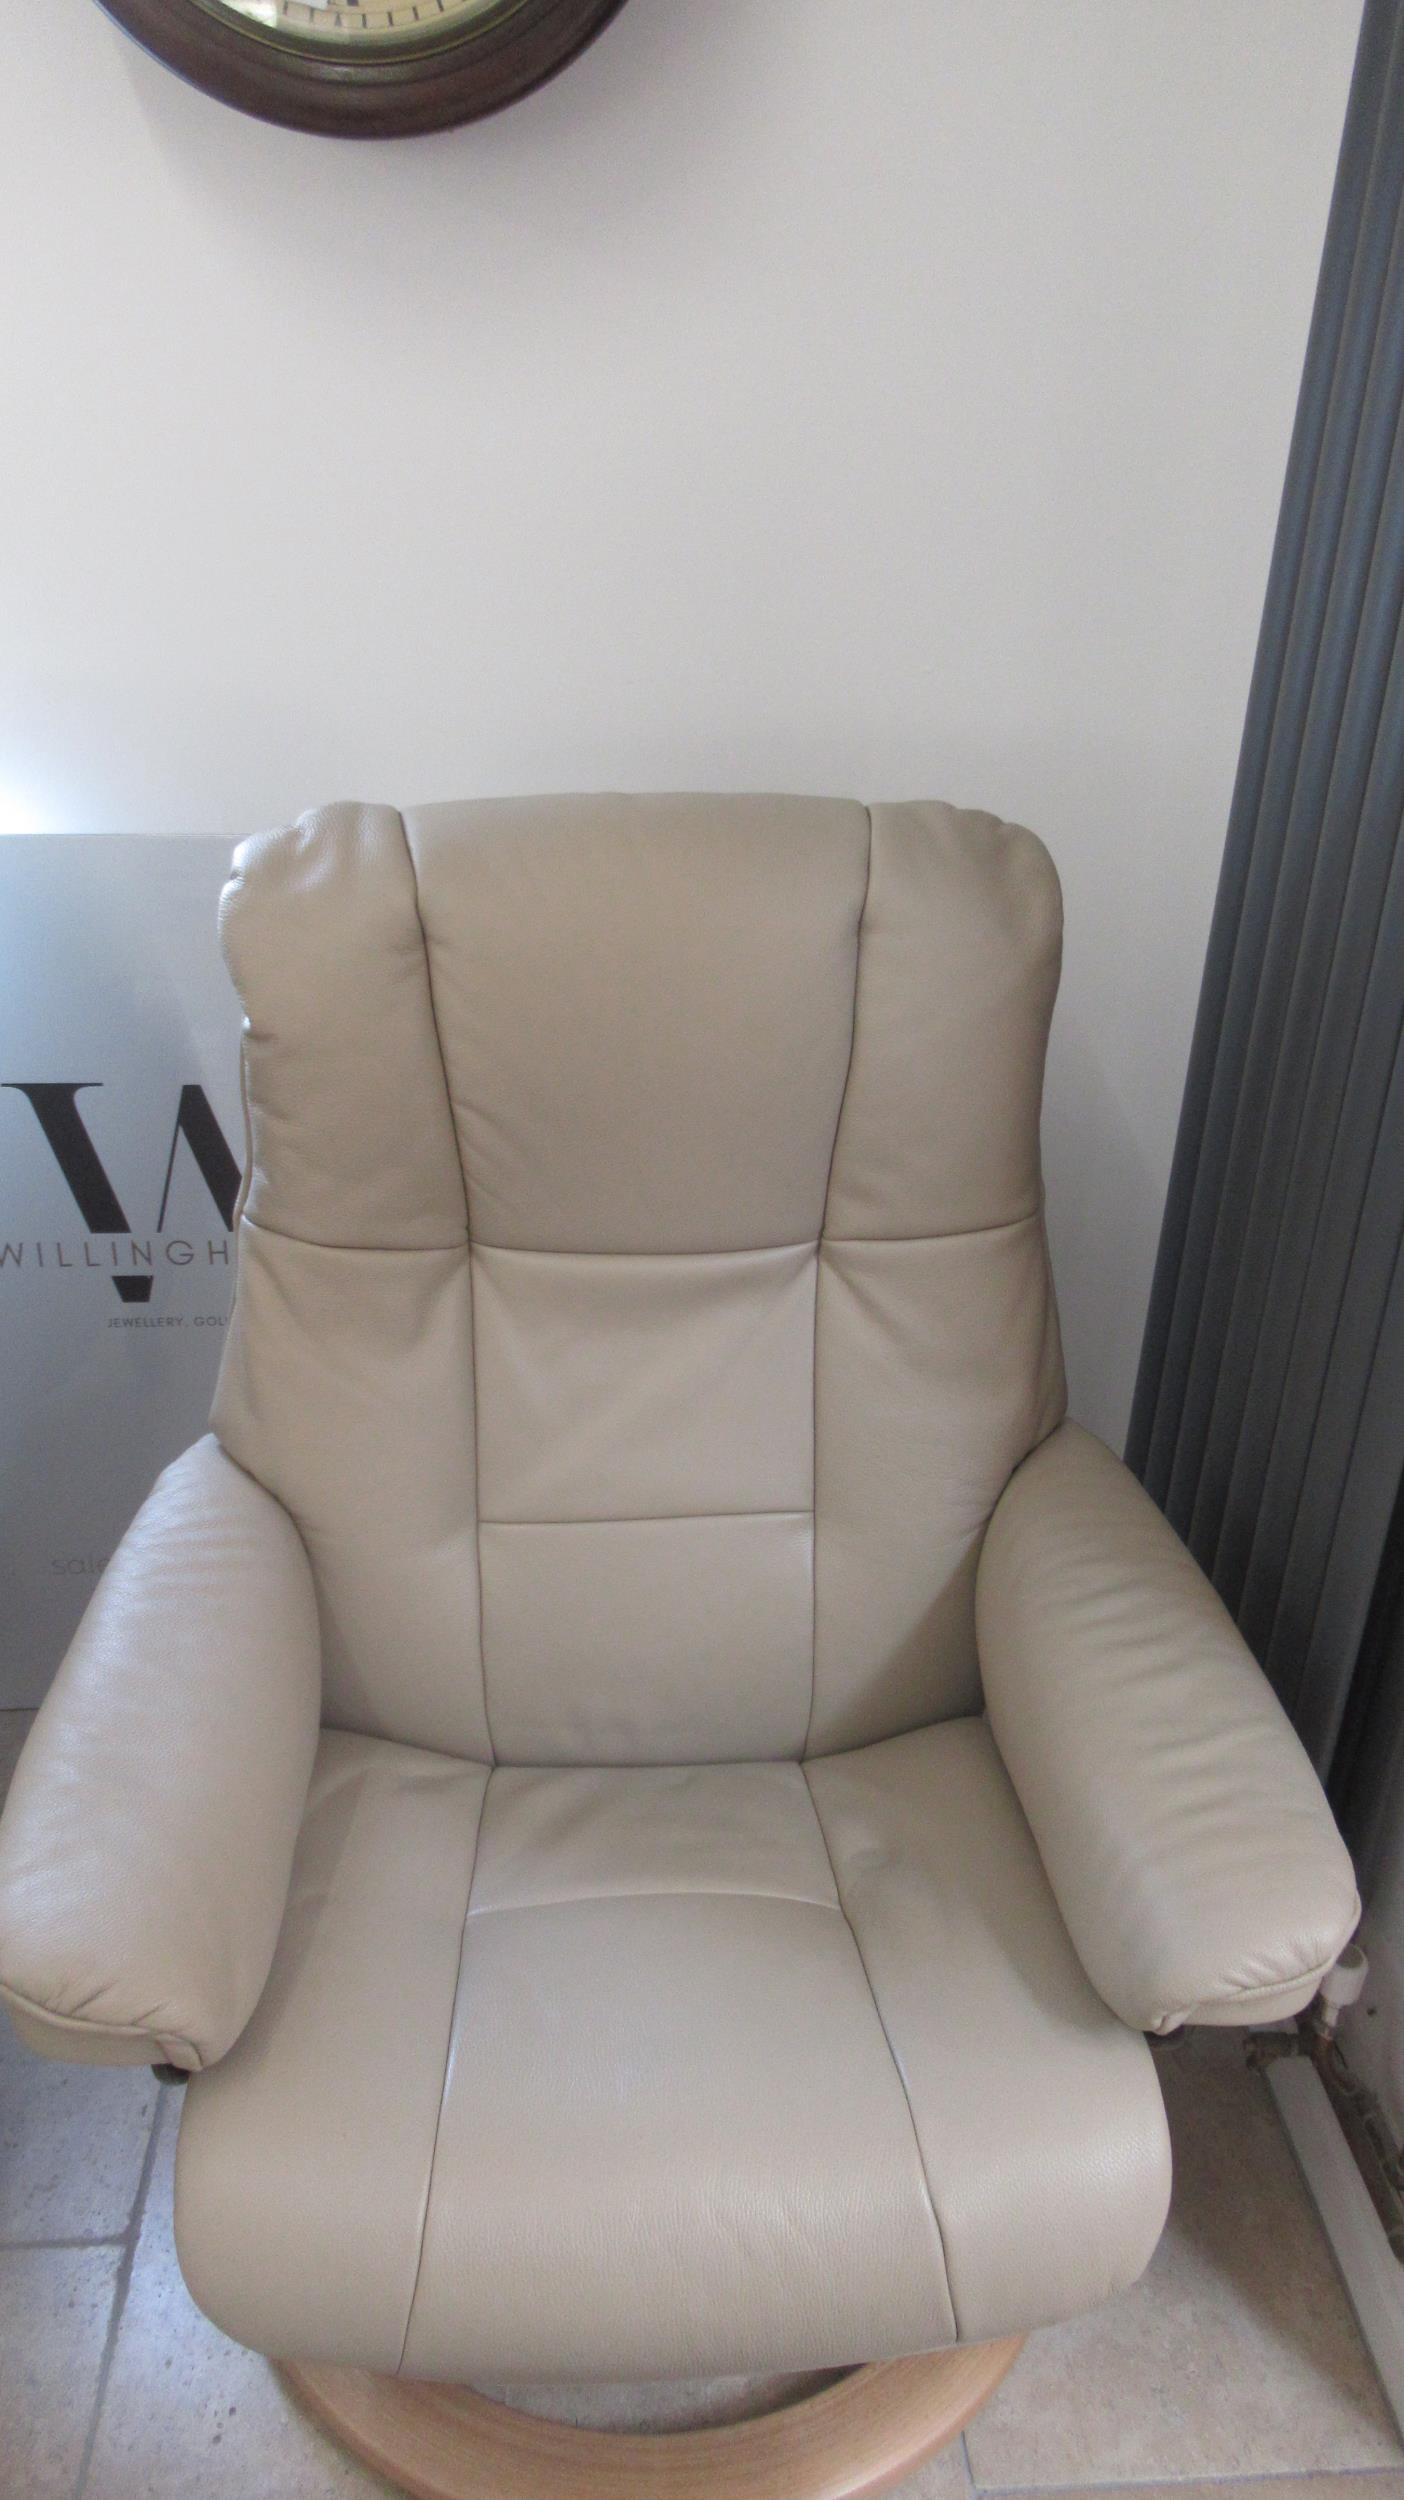 A Stressless Mayfair medium chair and stool, oak frame, with beige leather upholstery - Image 2 of 3